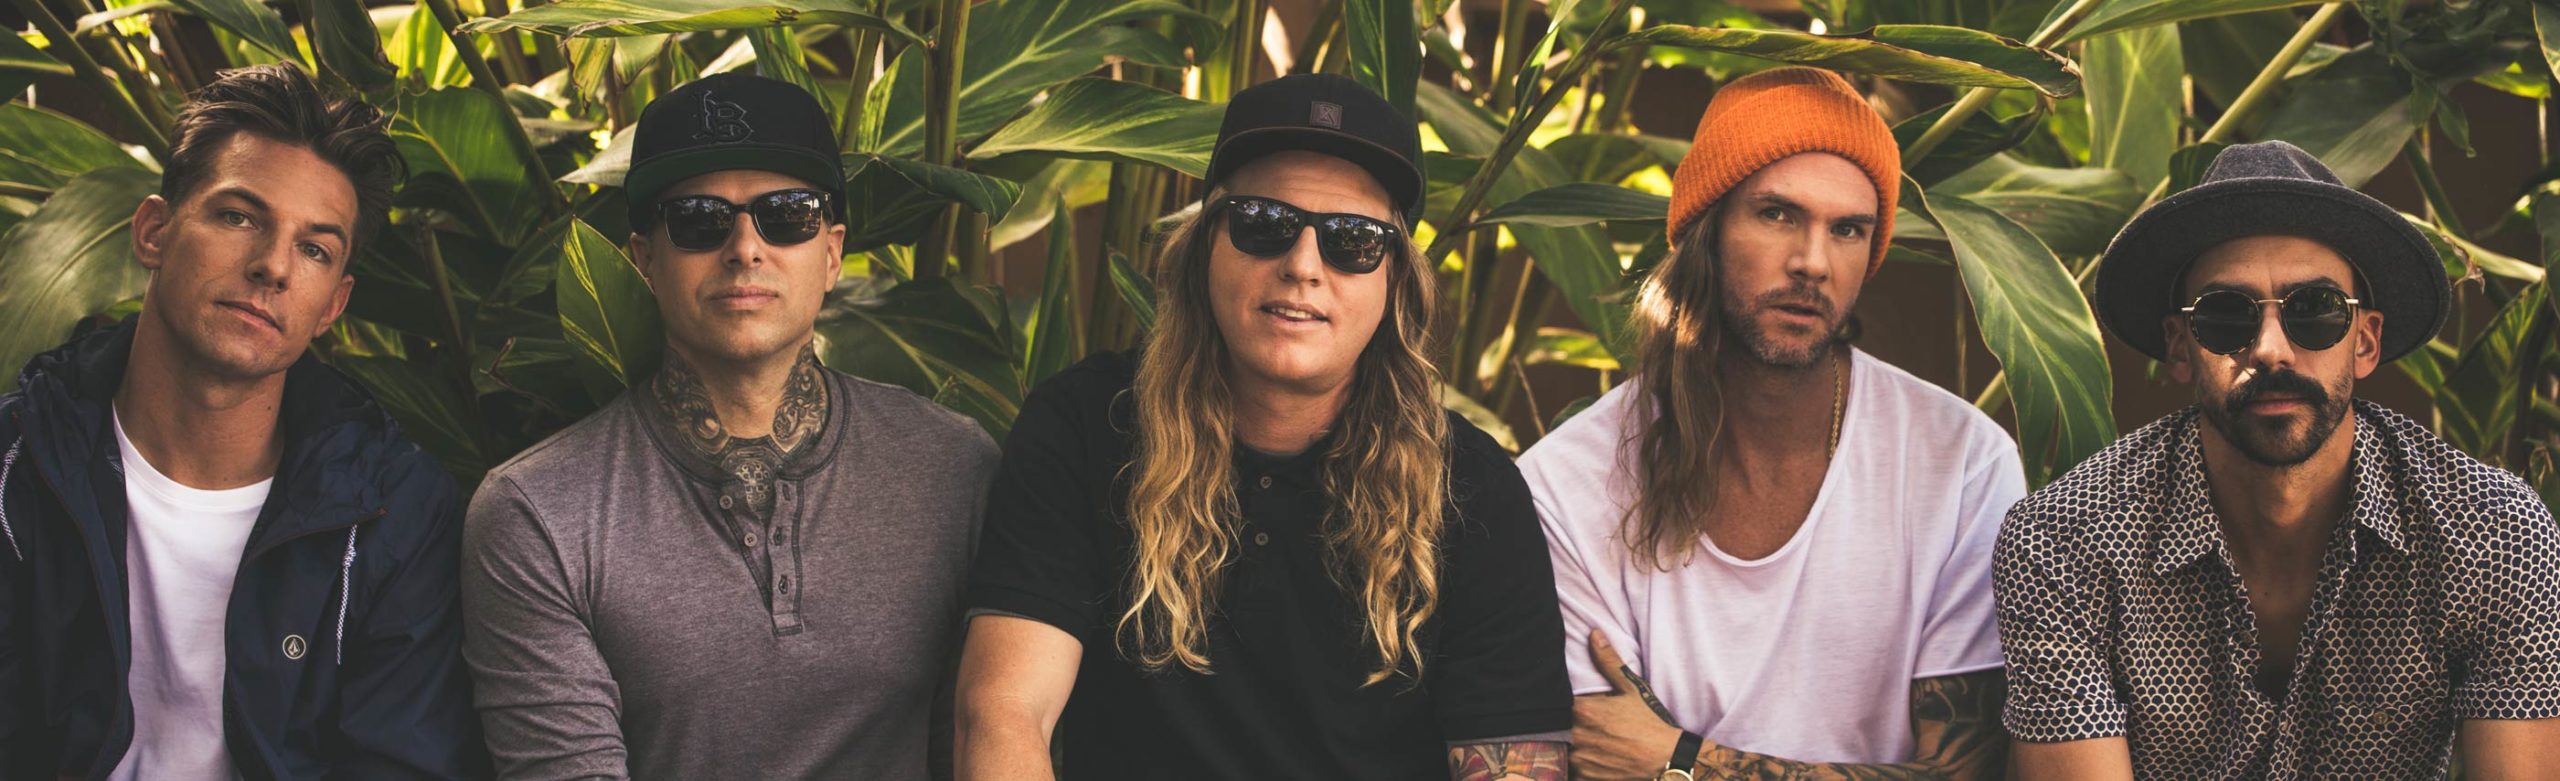 Event Info: Dirty Heads at KettleHouse Amphitheater 2018 Image